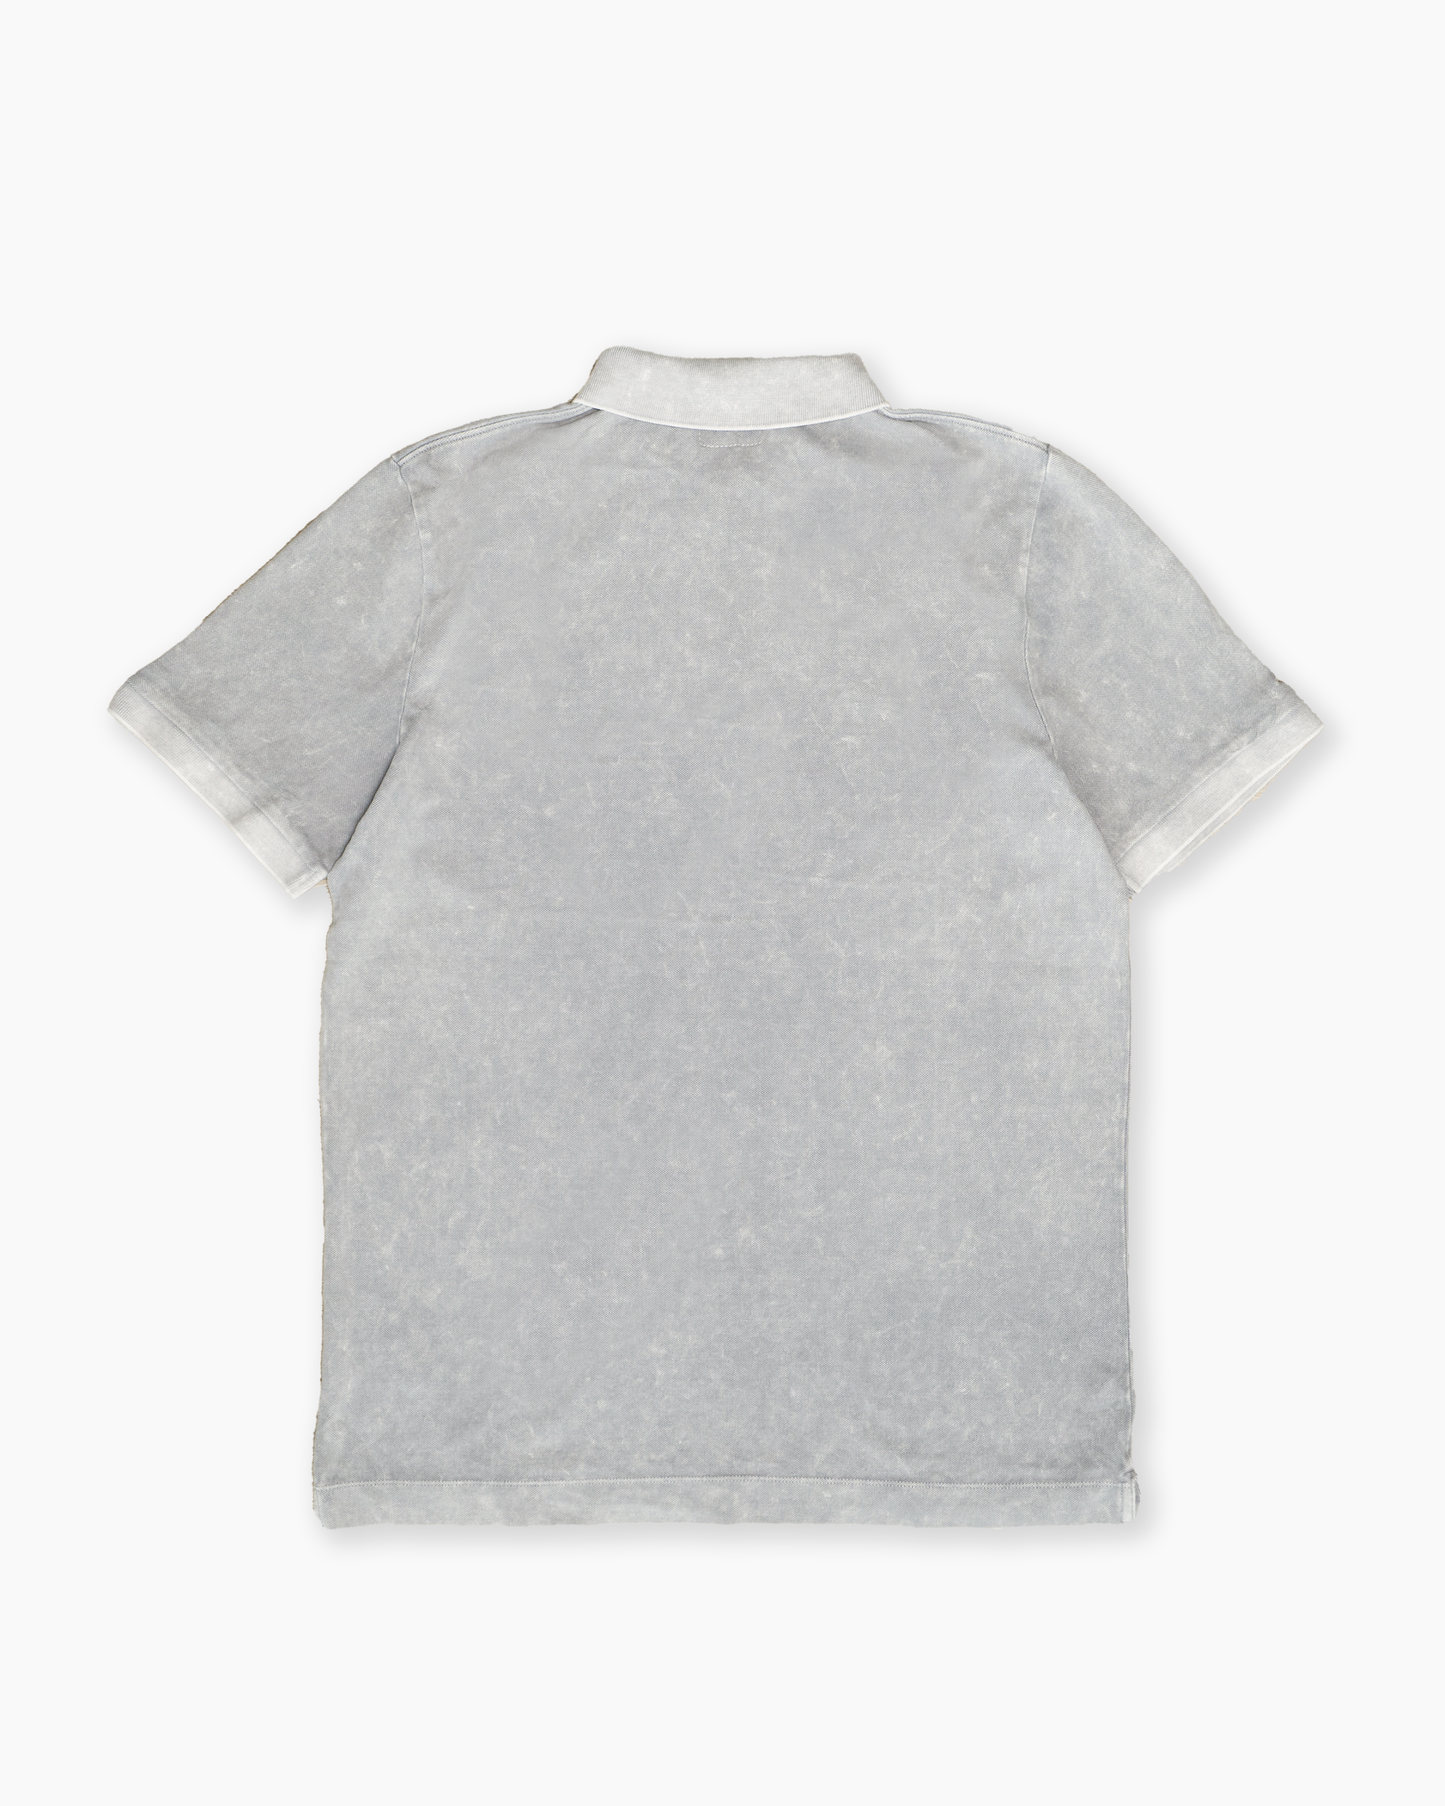 The GT Polo Shirt - Dyed Light Grey